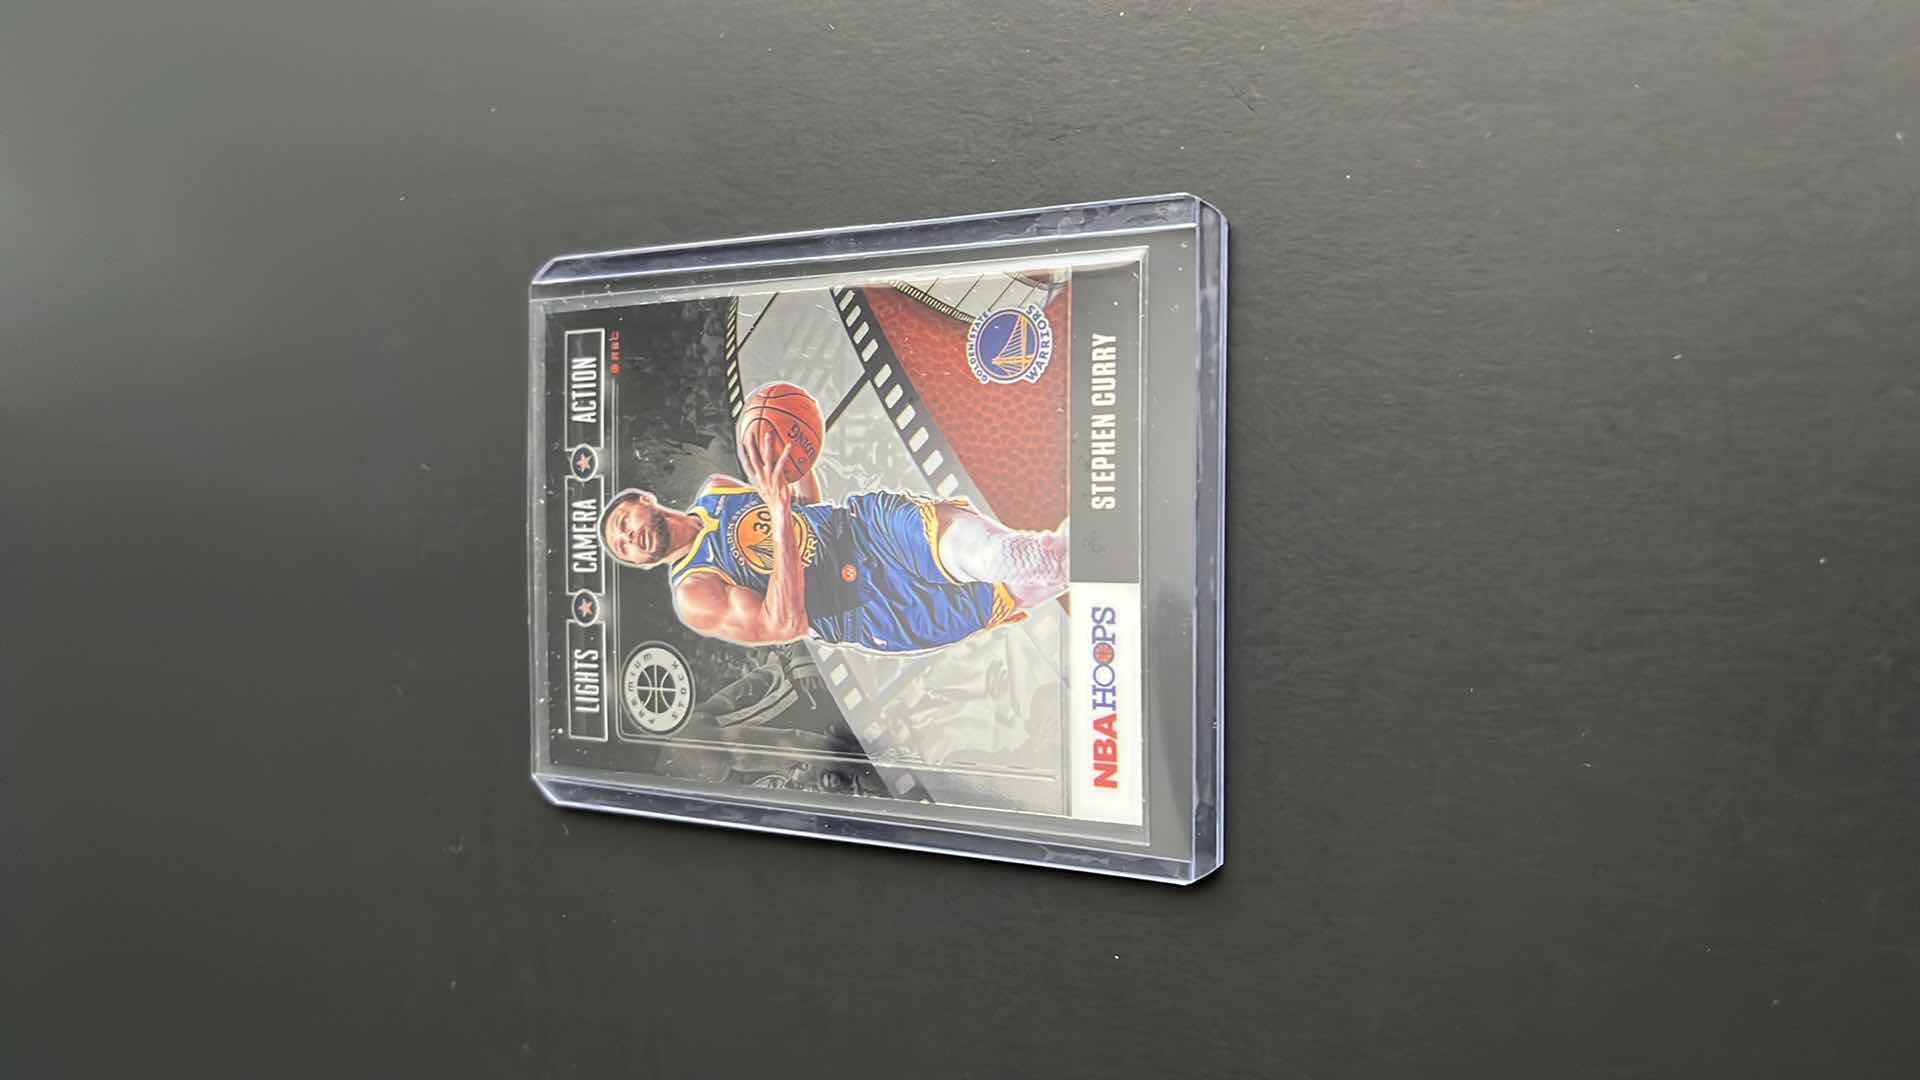 Photo 3 of 2019 STEPHEN CURRY PANINI LIGHTS, CAMERA, ACTION CARD 2